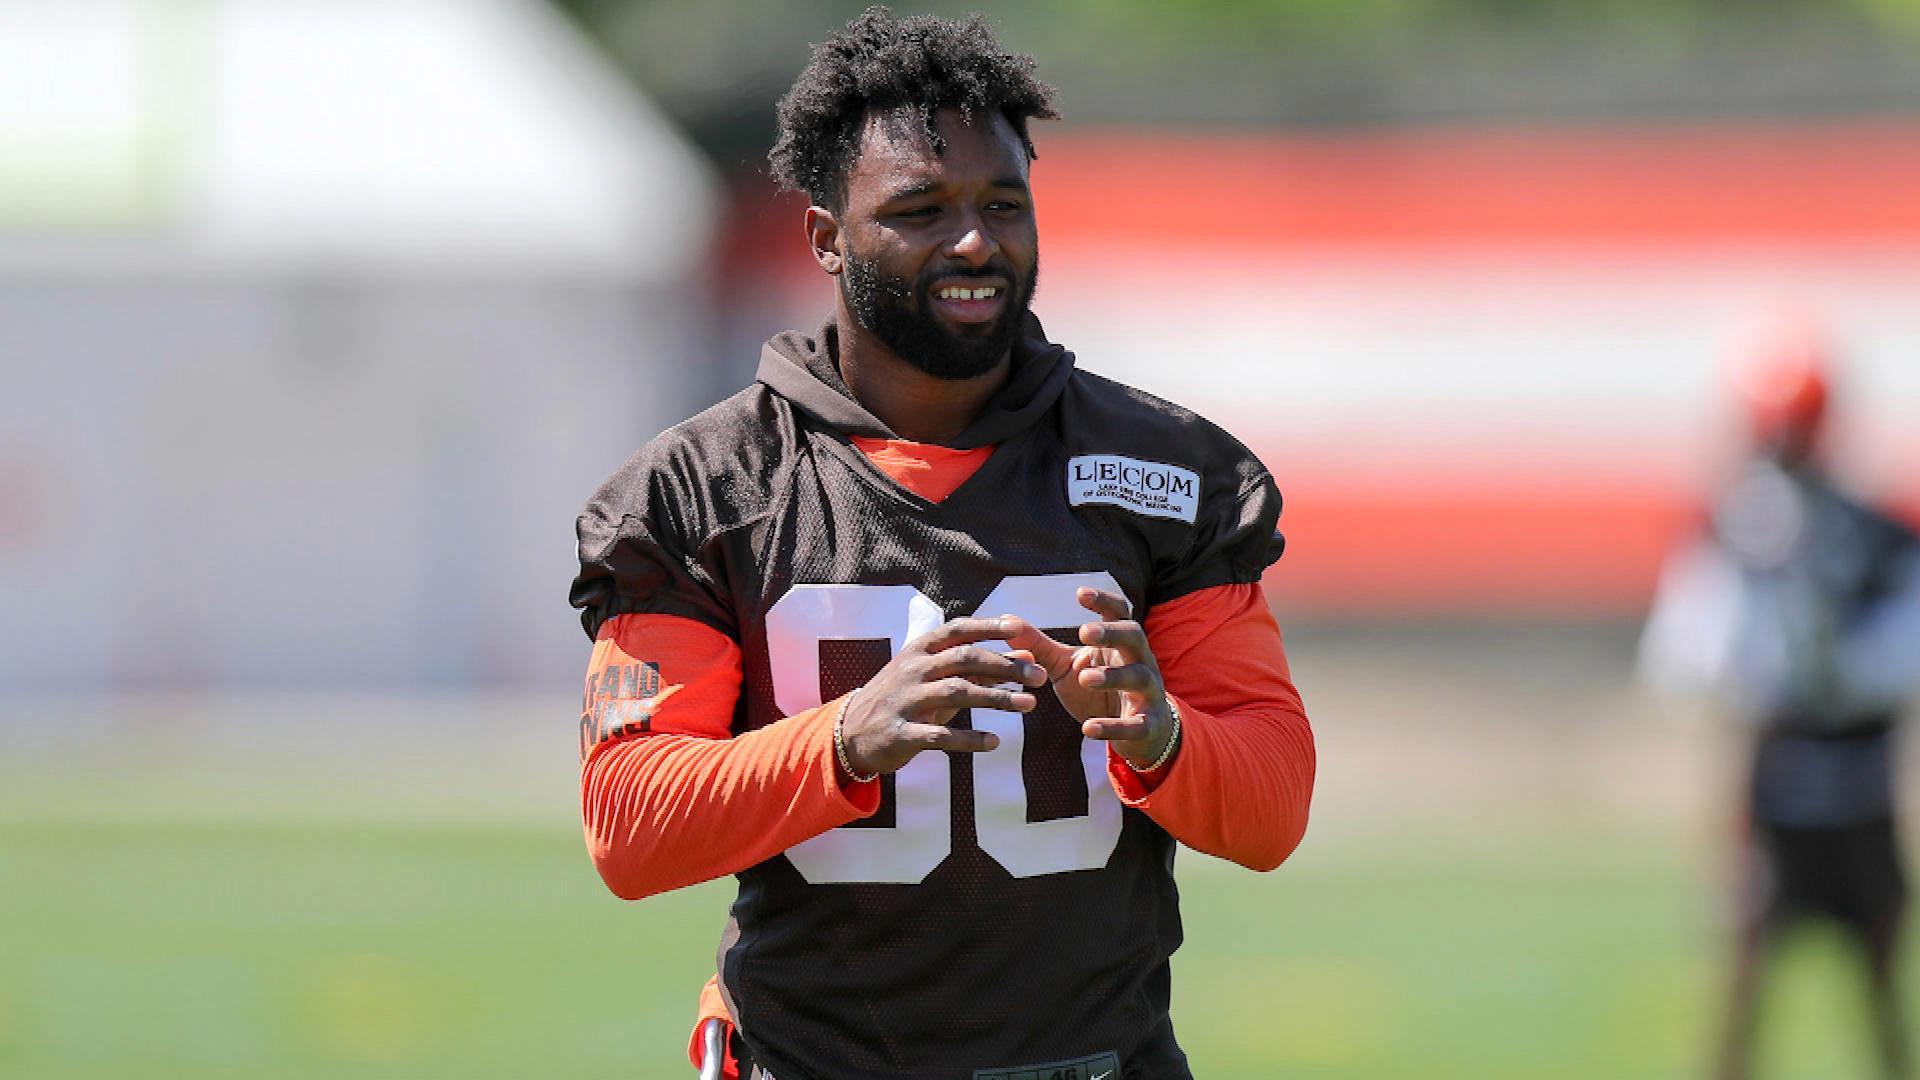 Jarvis Landry believes new Cleveland Browns roster will